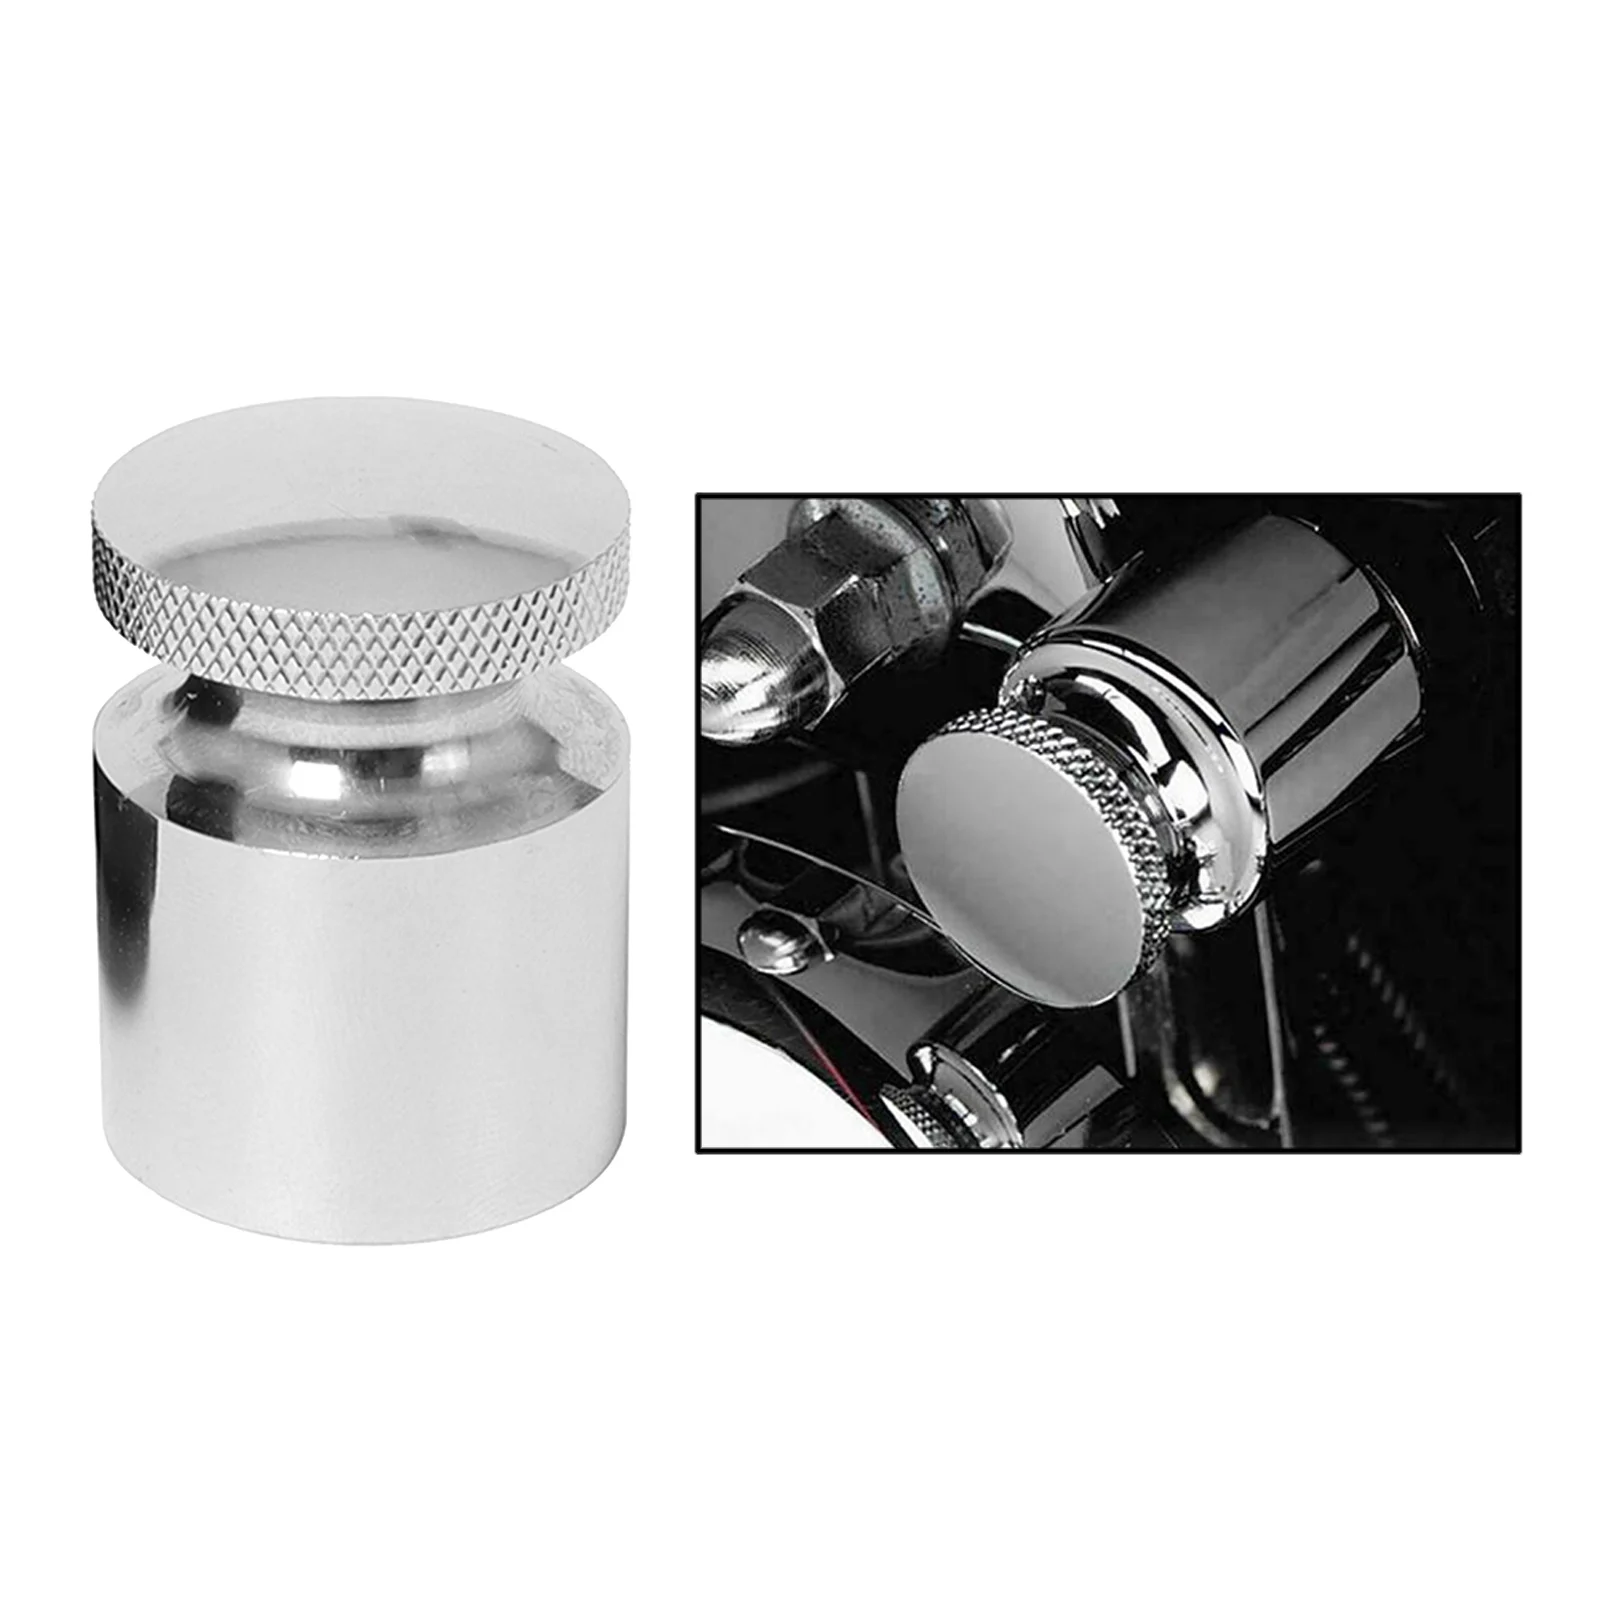 Accessory Choke Knob Cover Compatible for Harley Electra Glide Professional 1 piece